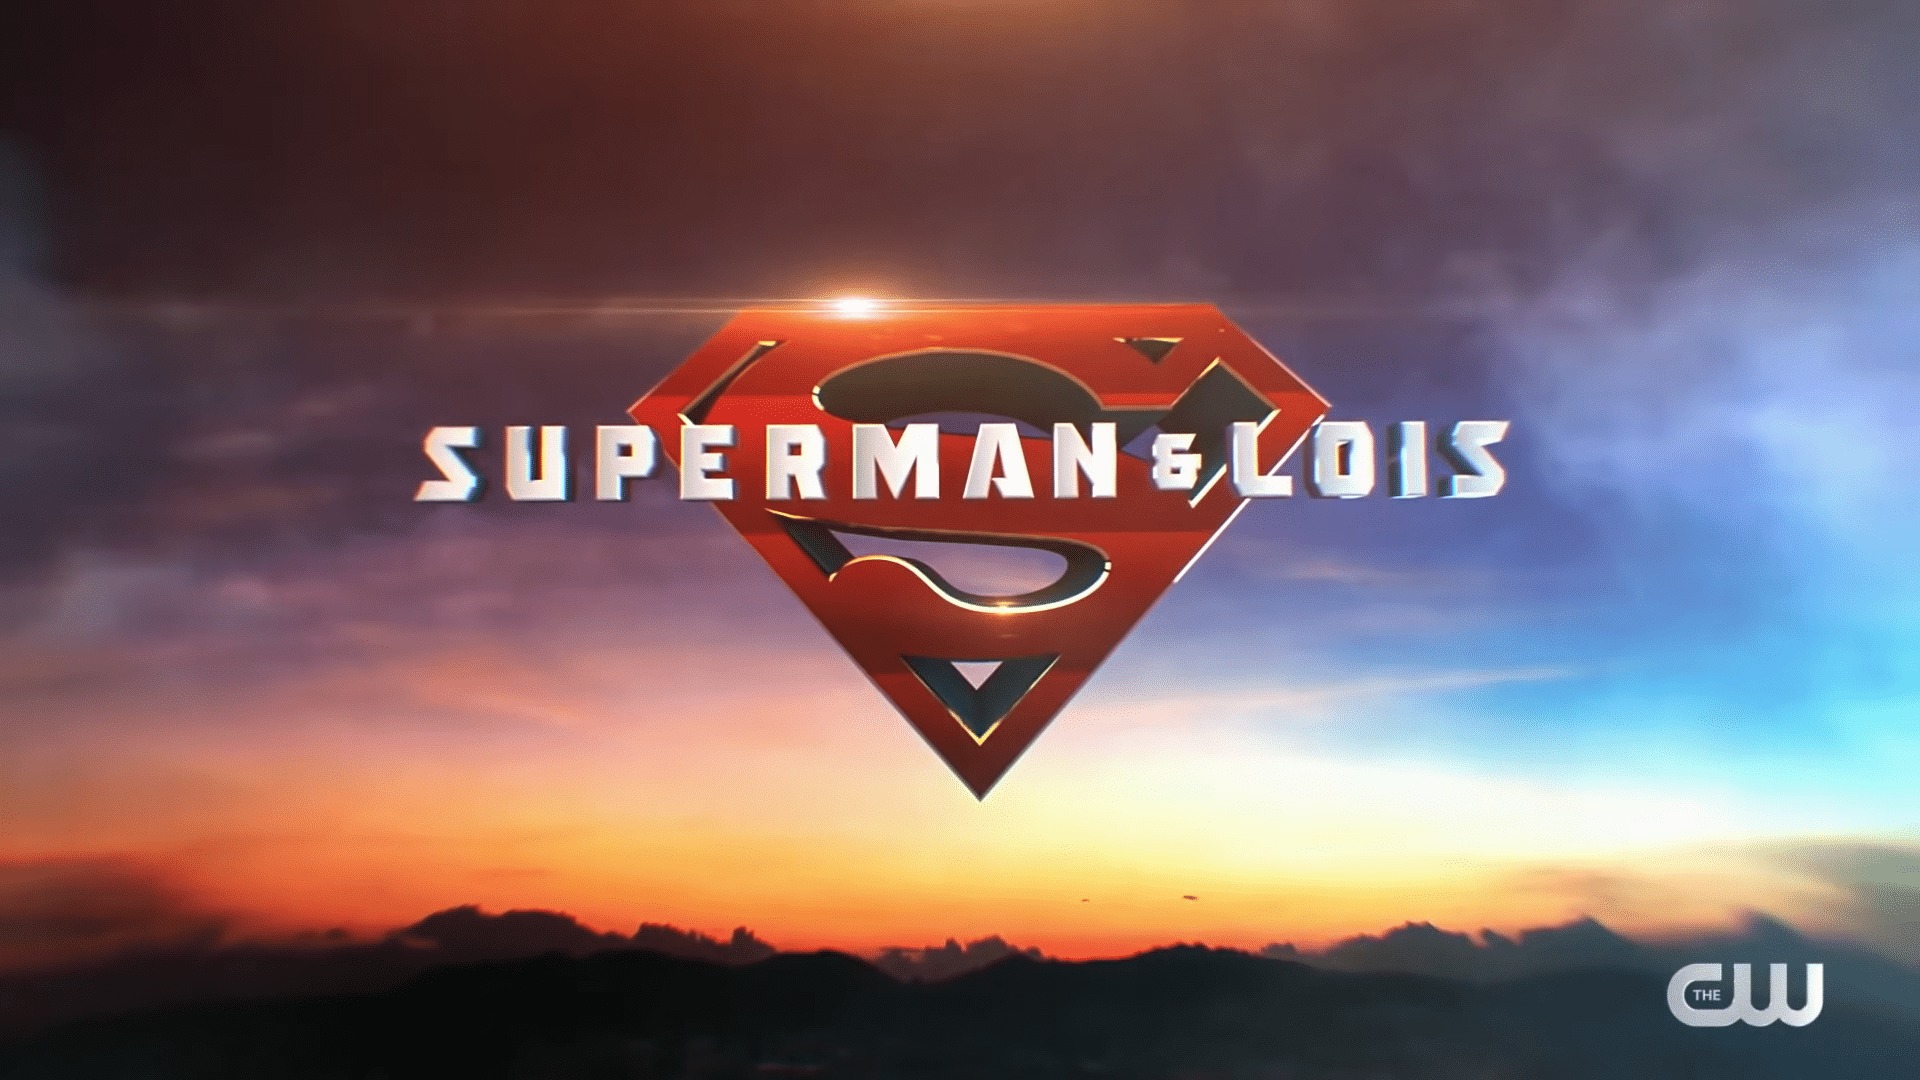 Is Superman Lois New Tonight On The Cw Season Episode Pre